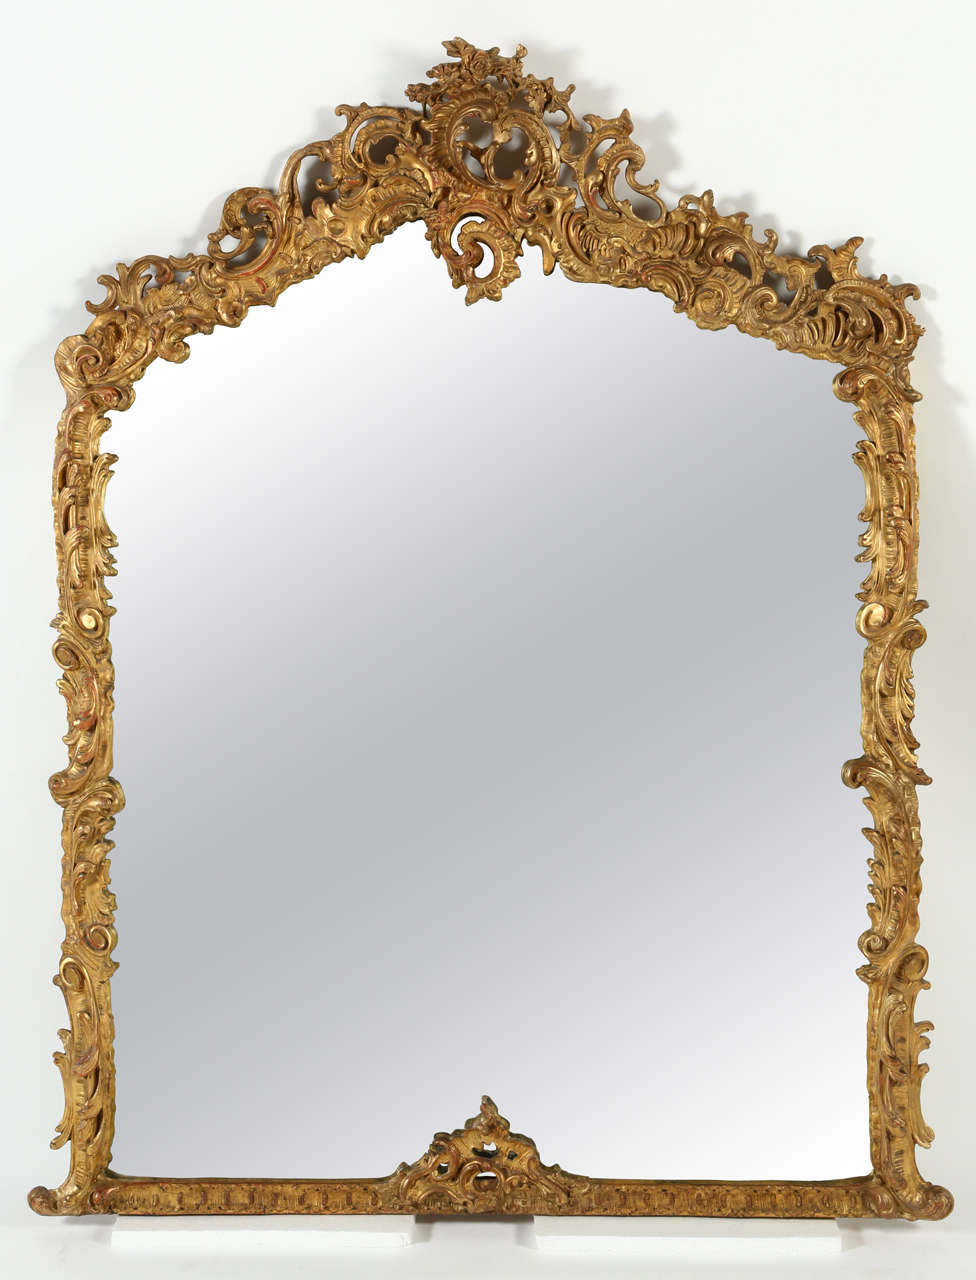 This large giltwood mirror from the 19th century has an arched glass plate within a C-scroll, vigorously carved, floral, foliate and rocaille-decorated crested surround. This mirror has a wonderful balance between simplicity of form and